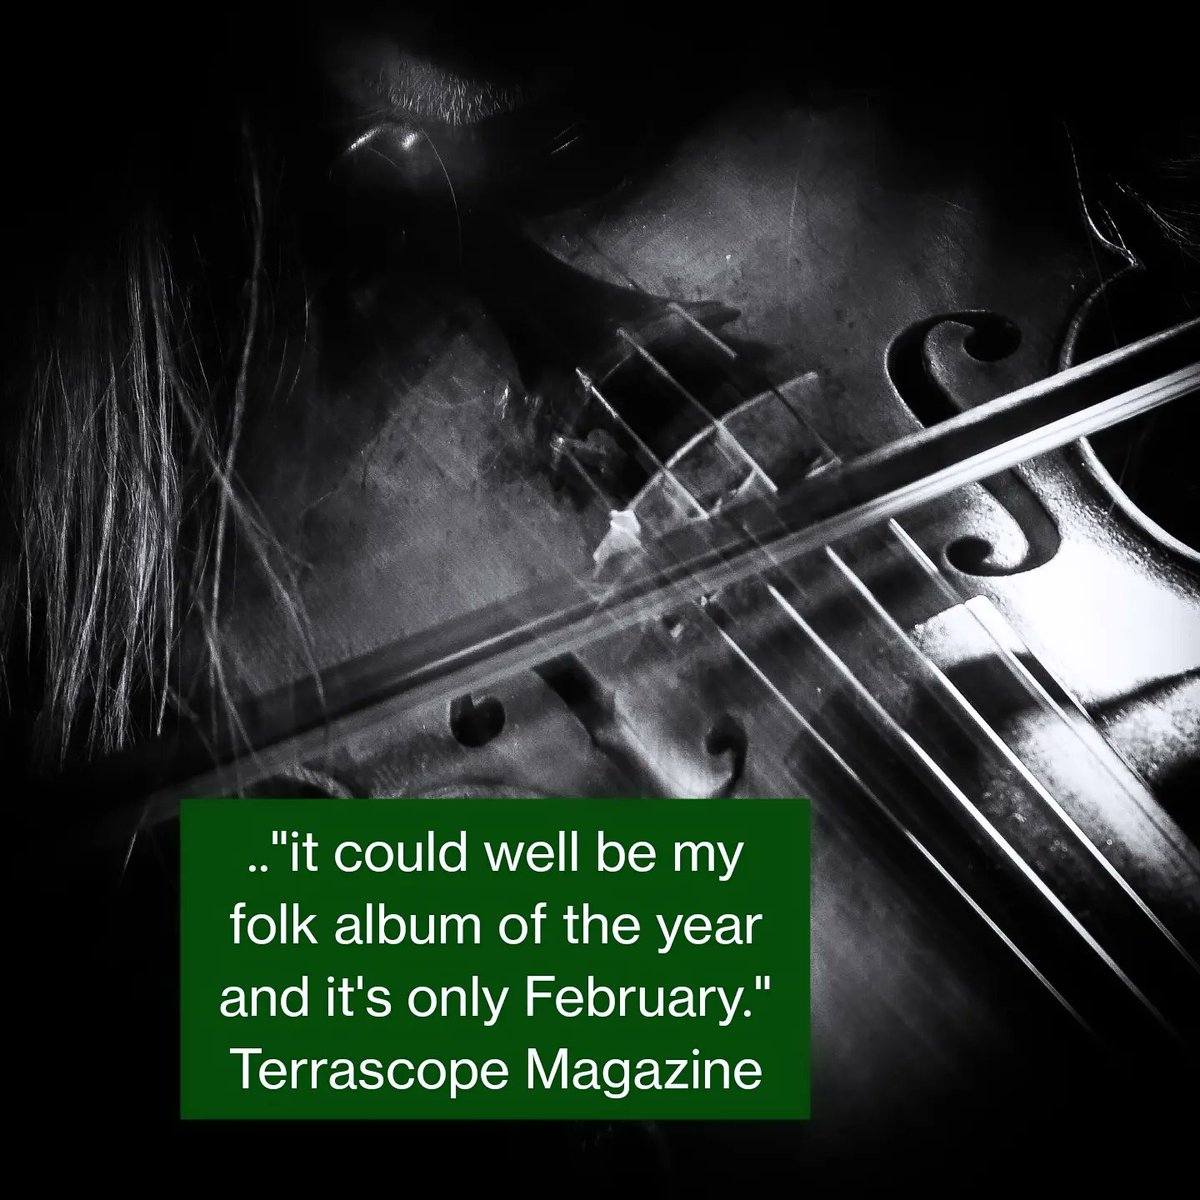 Many thanks to #AndrewYoung @Terrascope for his wee Rumbles review of 'Dark Harvest' 👇🏽 terrascope.co.uk/Reviews/Rumble… #folkmusic #music #americana #singersongwriter #rootsmusic #folk #folksinger #newmusic #folkalbum #musicreview #newmusic #newalbum #singer #acoustic #new #review